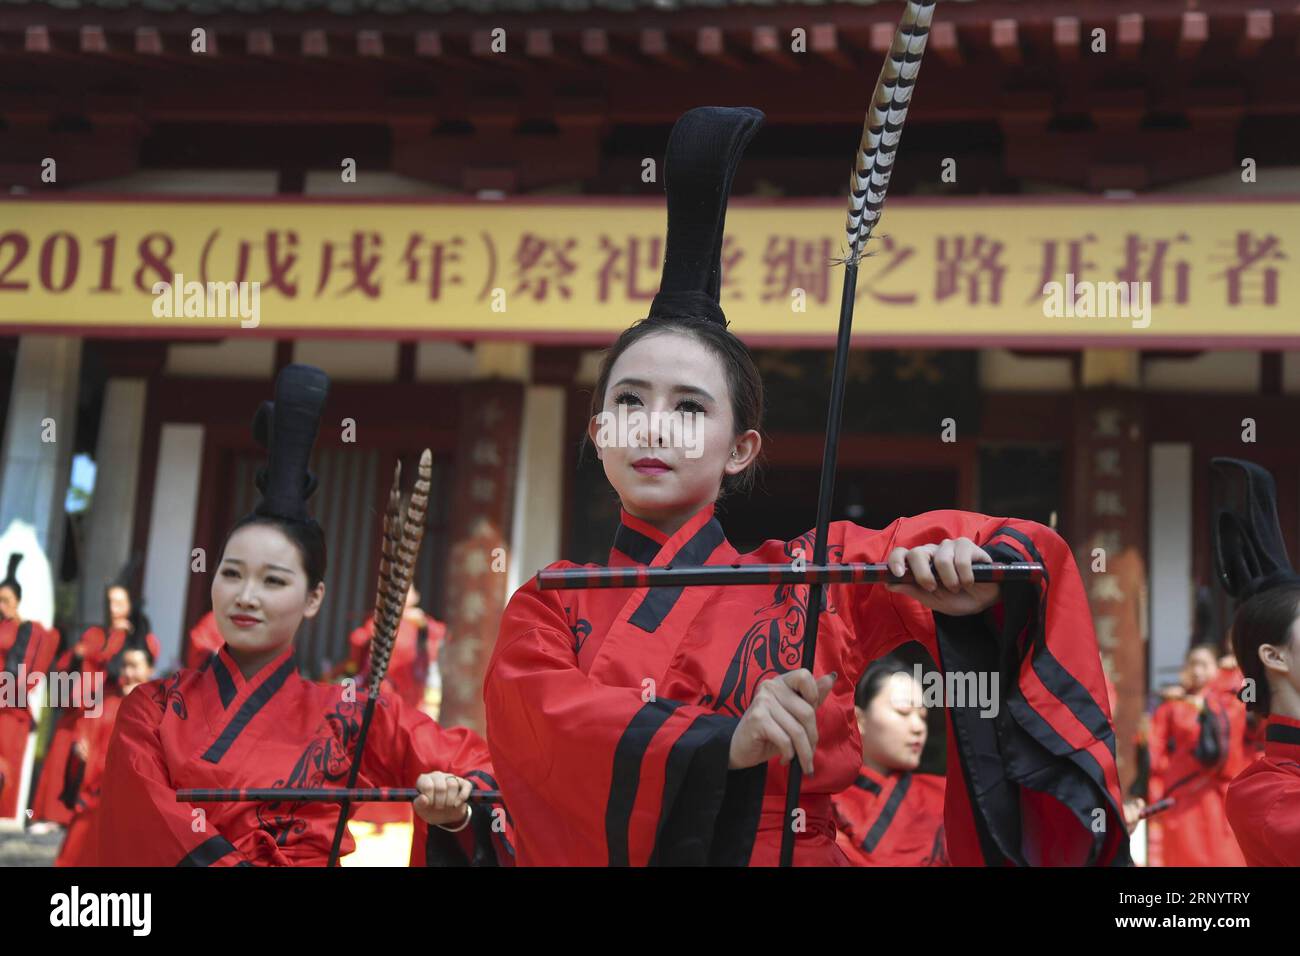 (180403) -- CHENGGU, April 3, 2018 -- People perform on the ceremony in memory of Zhang Qian, in Chenggu County, northwest China s Shaanxi Province, April 3, 2018. Zhang Qian, a royal emissary in China s Han Dynasty (202 B.C.-220 A.D.), traveled westward on a mission of peace and opened an overland route linking the East and the West, a daring undertaking which came to be known as Zhang Qian s journey to the Western regions. ) (dhf) CHINA-SHAANXI-ZHANG QIAN-CEREMONY (CN) TaoxMing PUBLICATIONxNOTxINxCHN Stock Photo